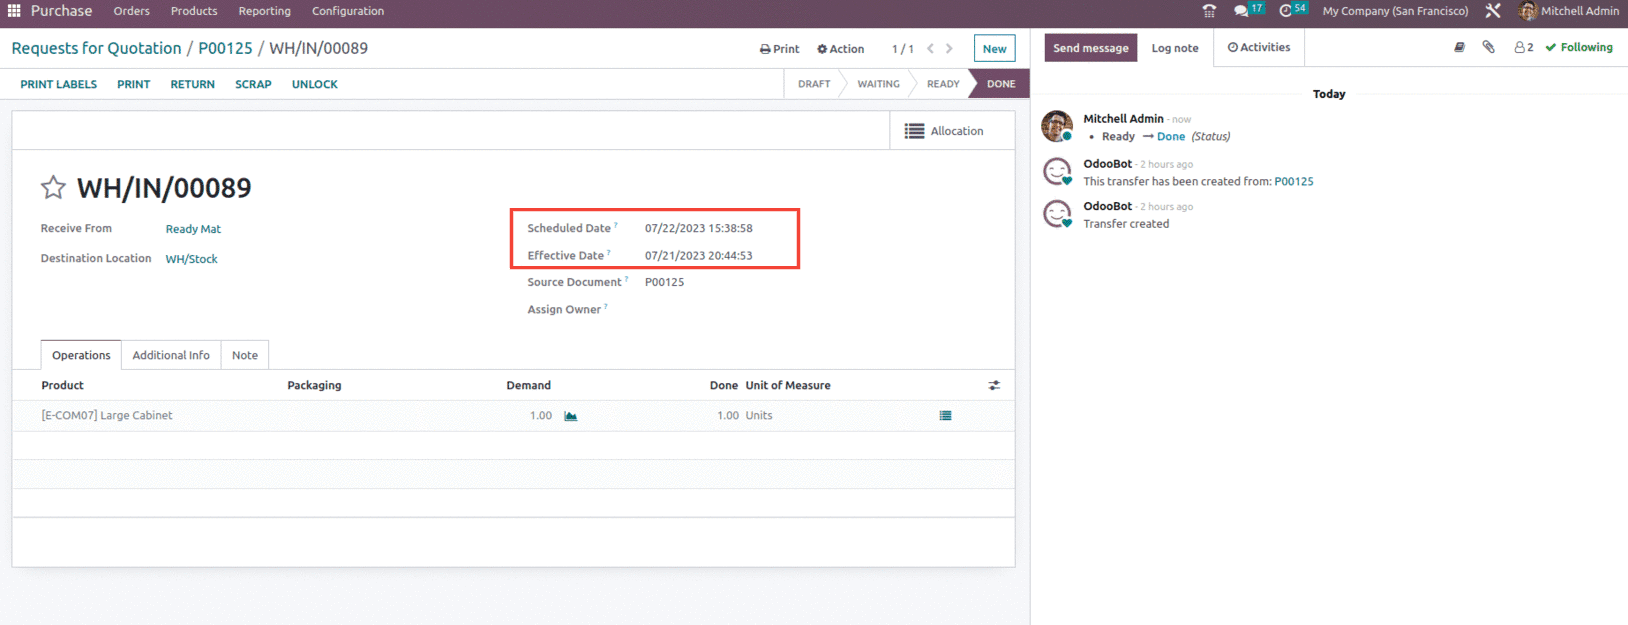 An Overview of Vendor Pricelist Management in Odoo 16 Purchase App-cybrosys